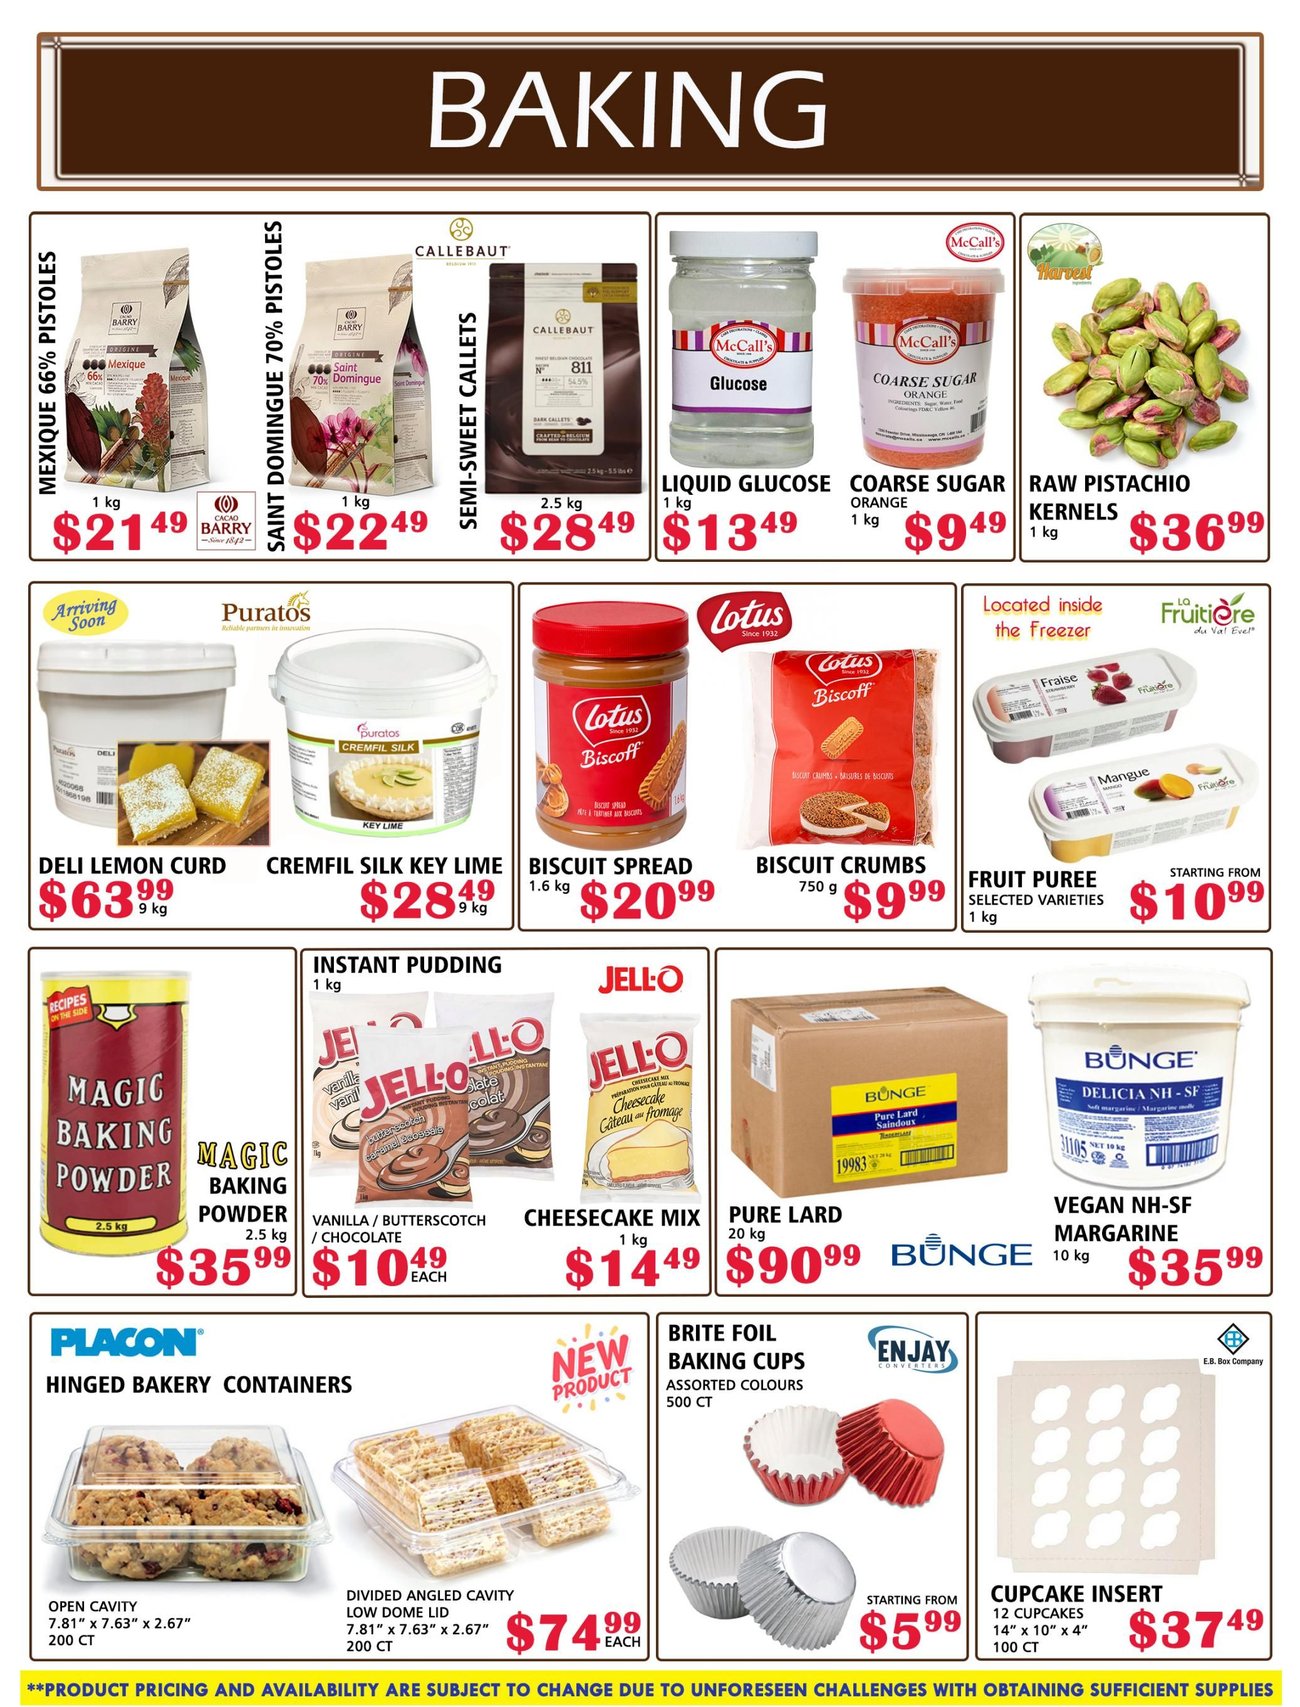 MVR Cash and Carry - Monthly Specials - Page 5